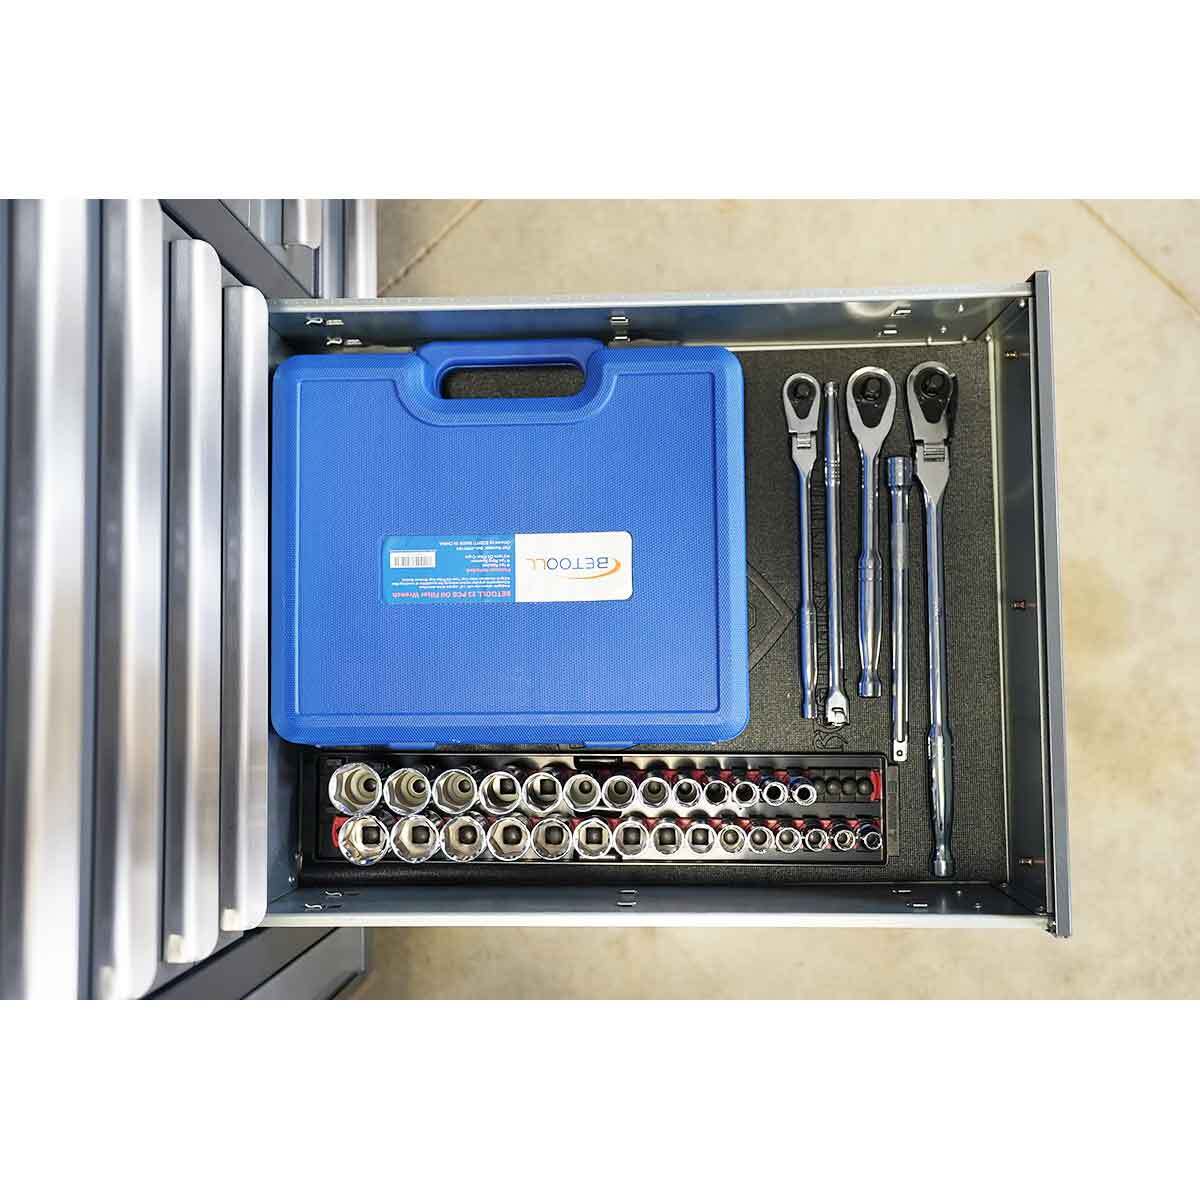 Get a Reliable Metal 12-Drawer Tool Cabinet at a Great Price